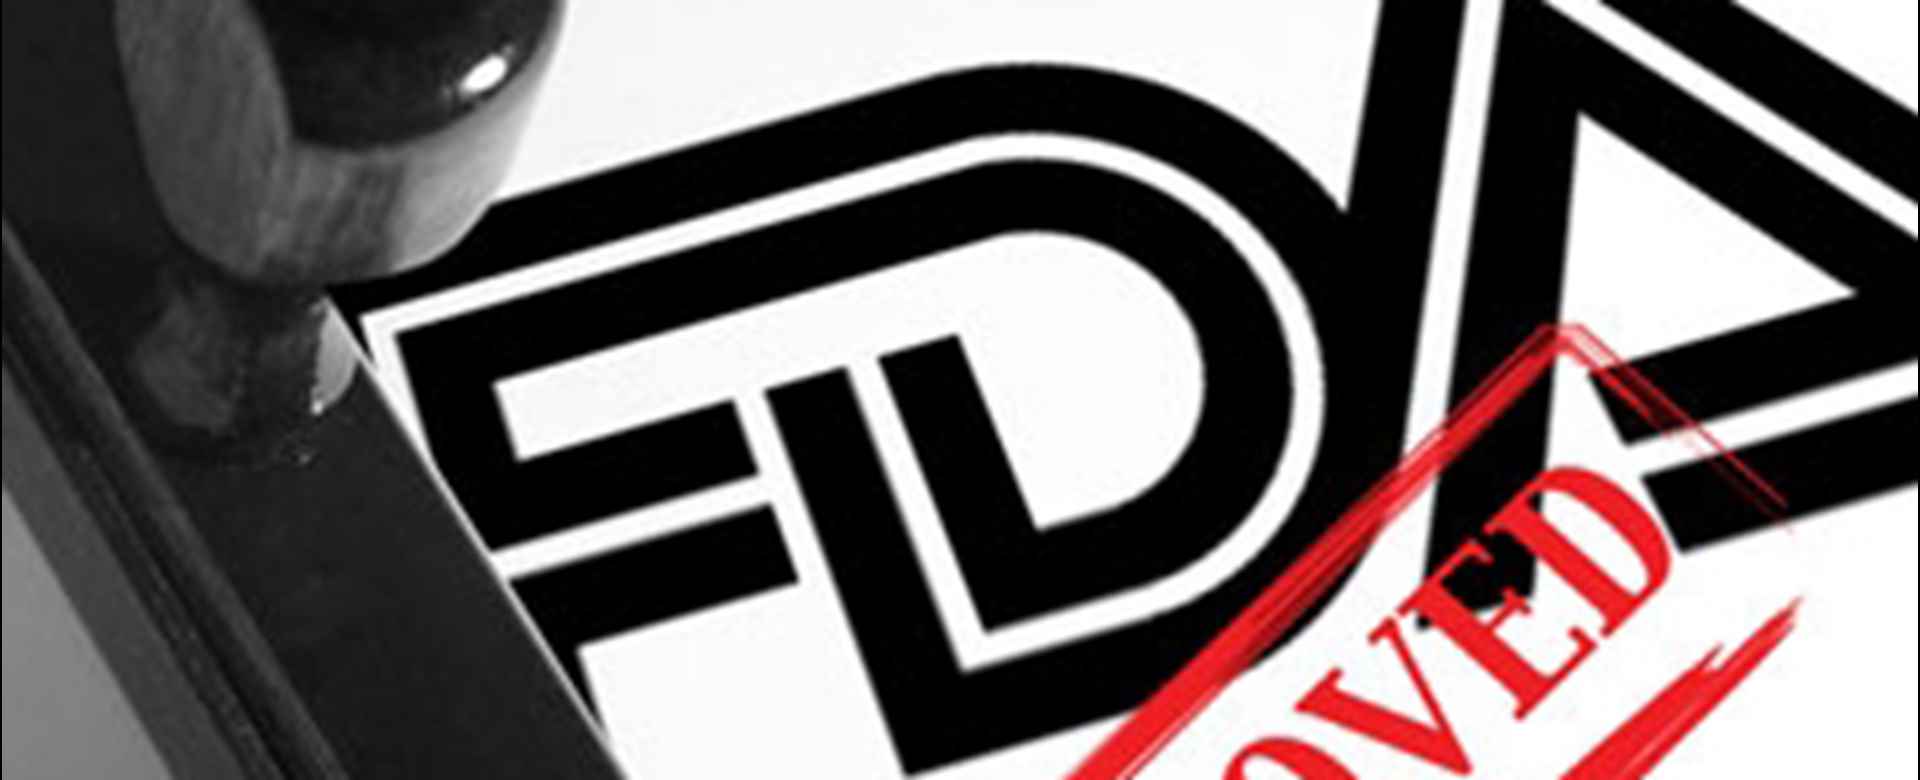 FDA’s Drug Approval Process How it Fits into the US Health Delivery System